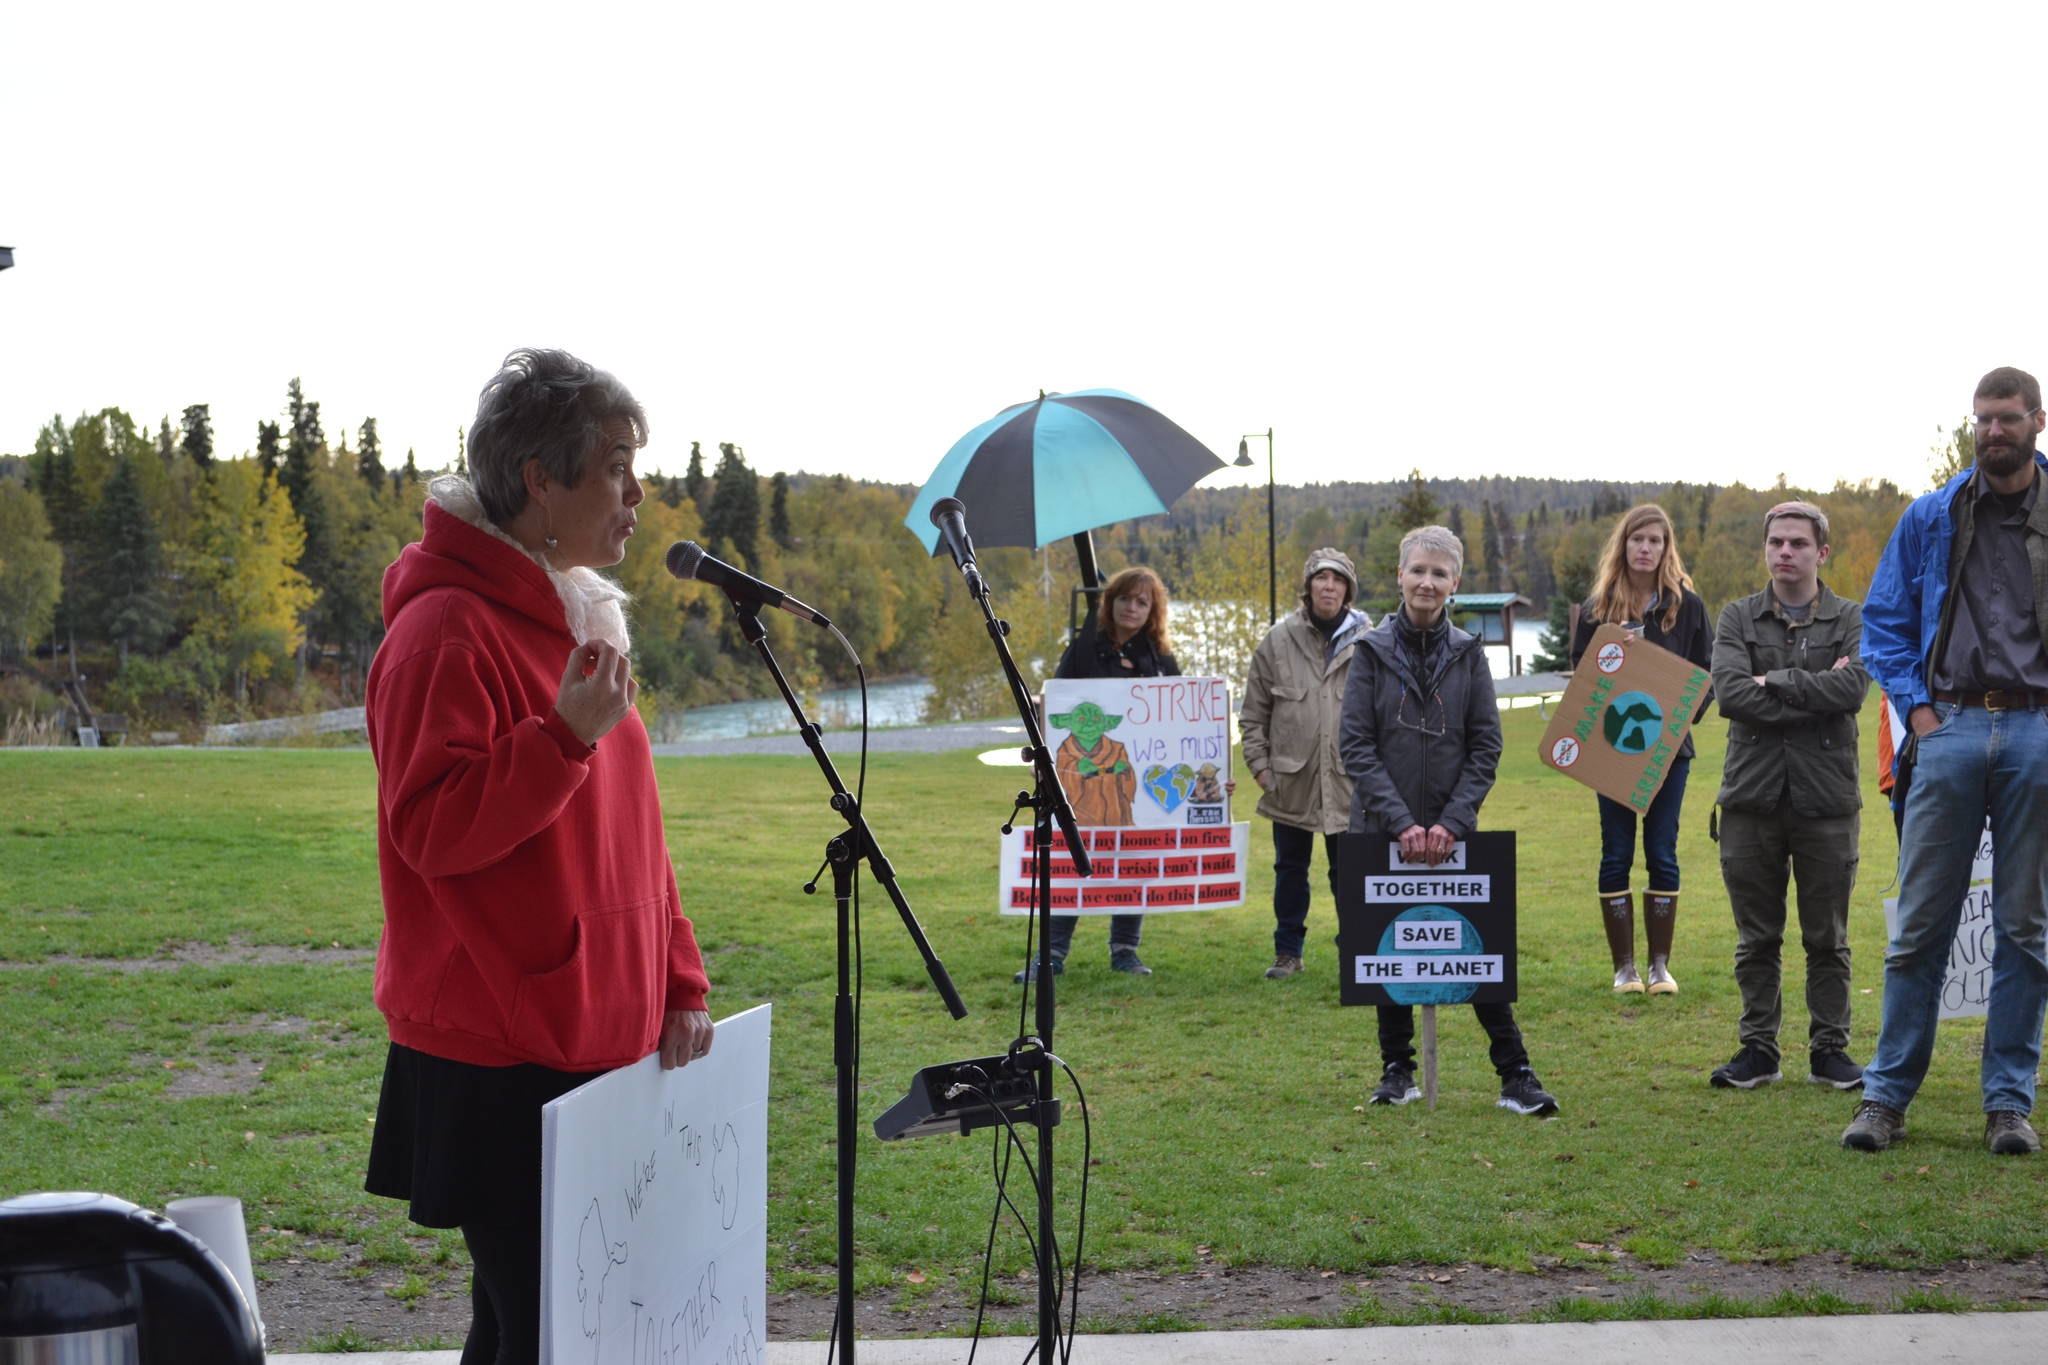 Soldotna physician Kristen Mitchell speaks to participants in the Soldotna Climate Strike in Soldotna Creek Park on Sept. 20, 2019. (Photo by Brian Mazurek/Peninsula Clarion)